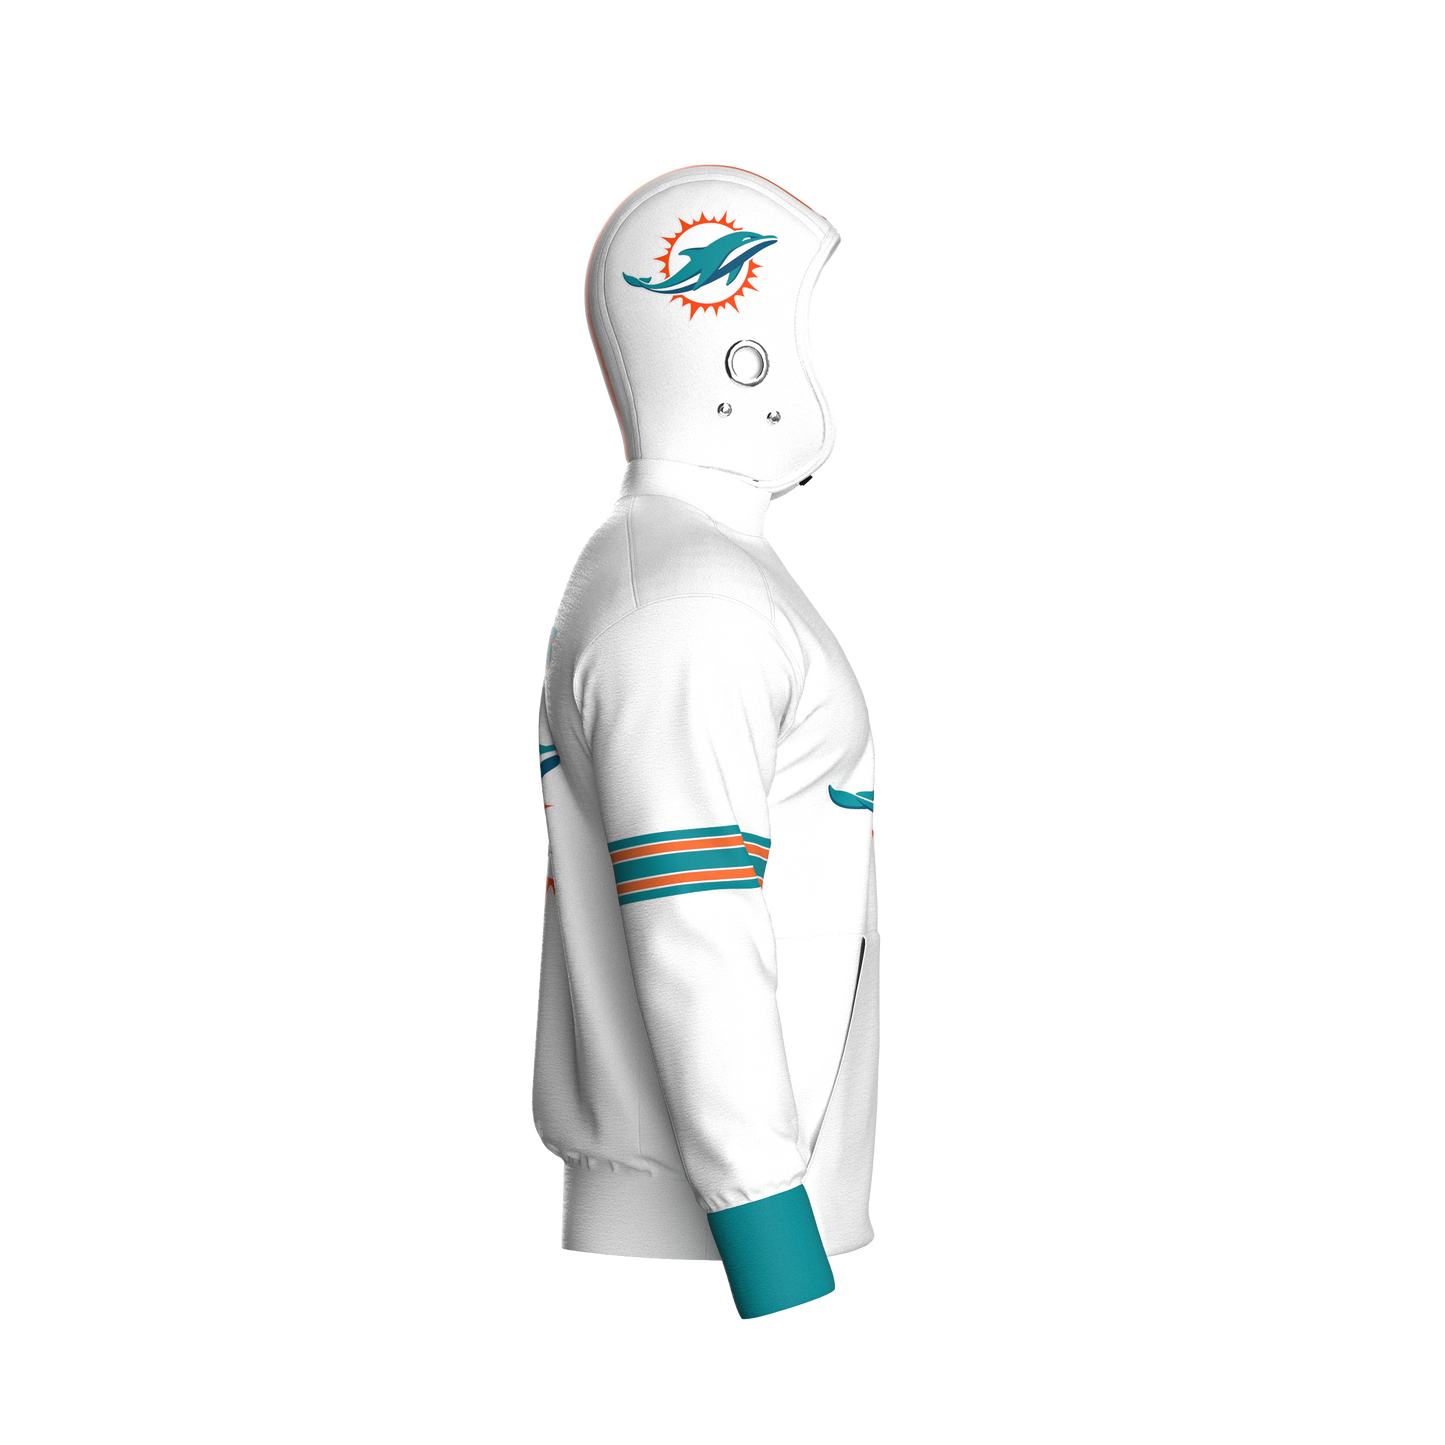 Miami Dolphins Away Pullover (youth)